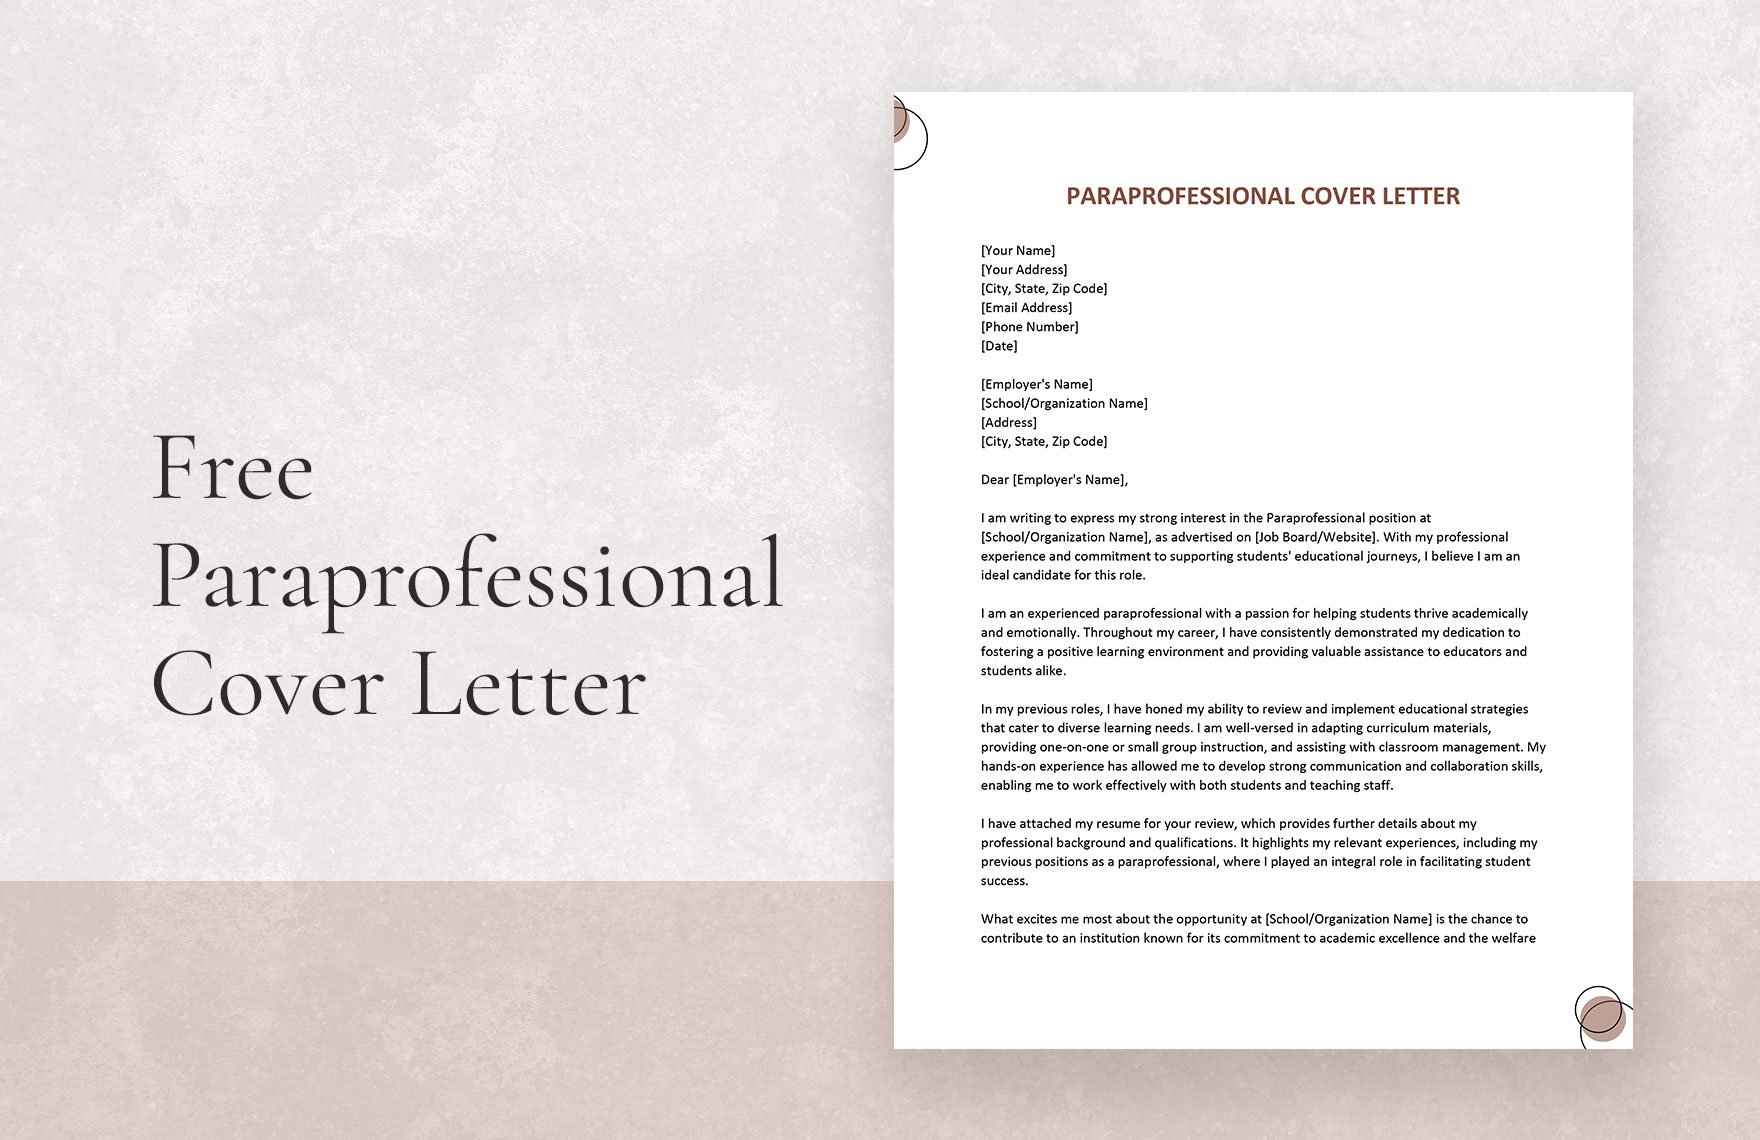 Paraprofessional Cover Letter